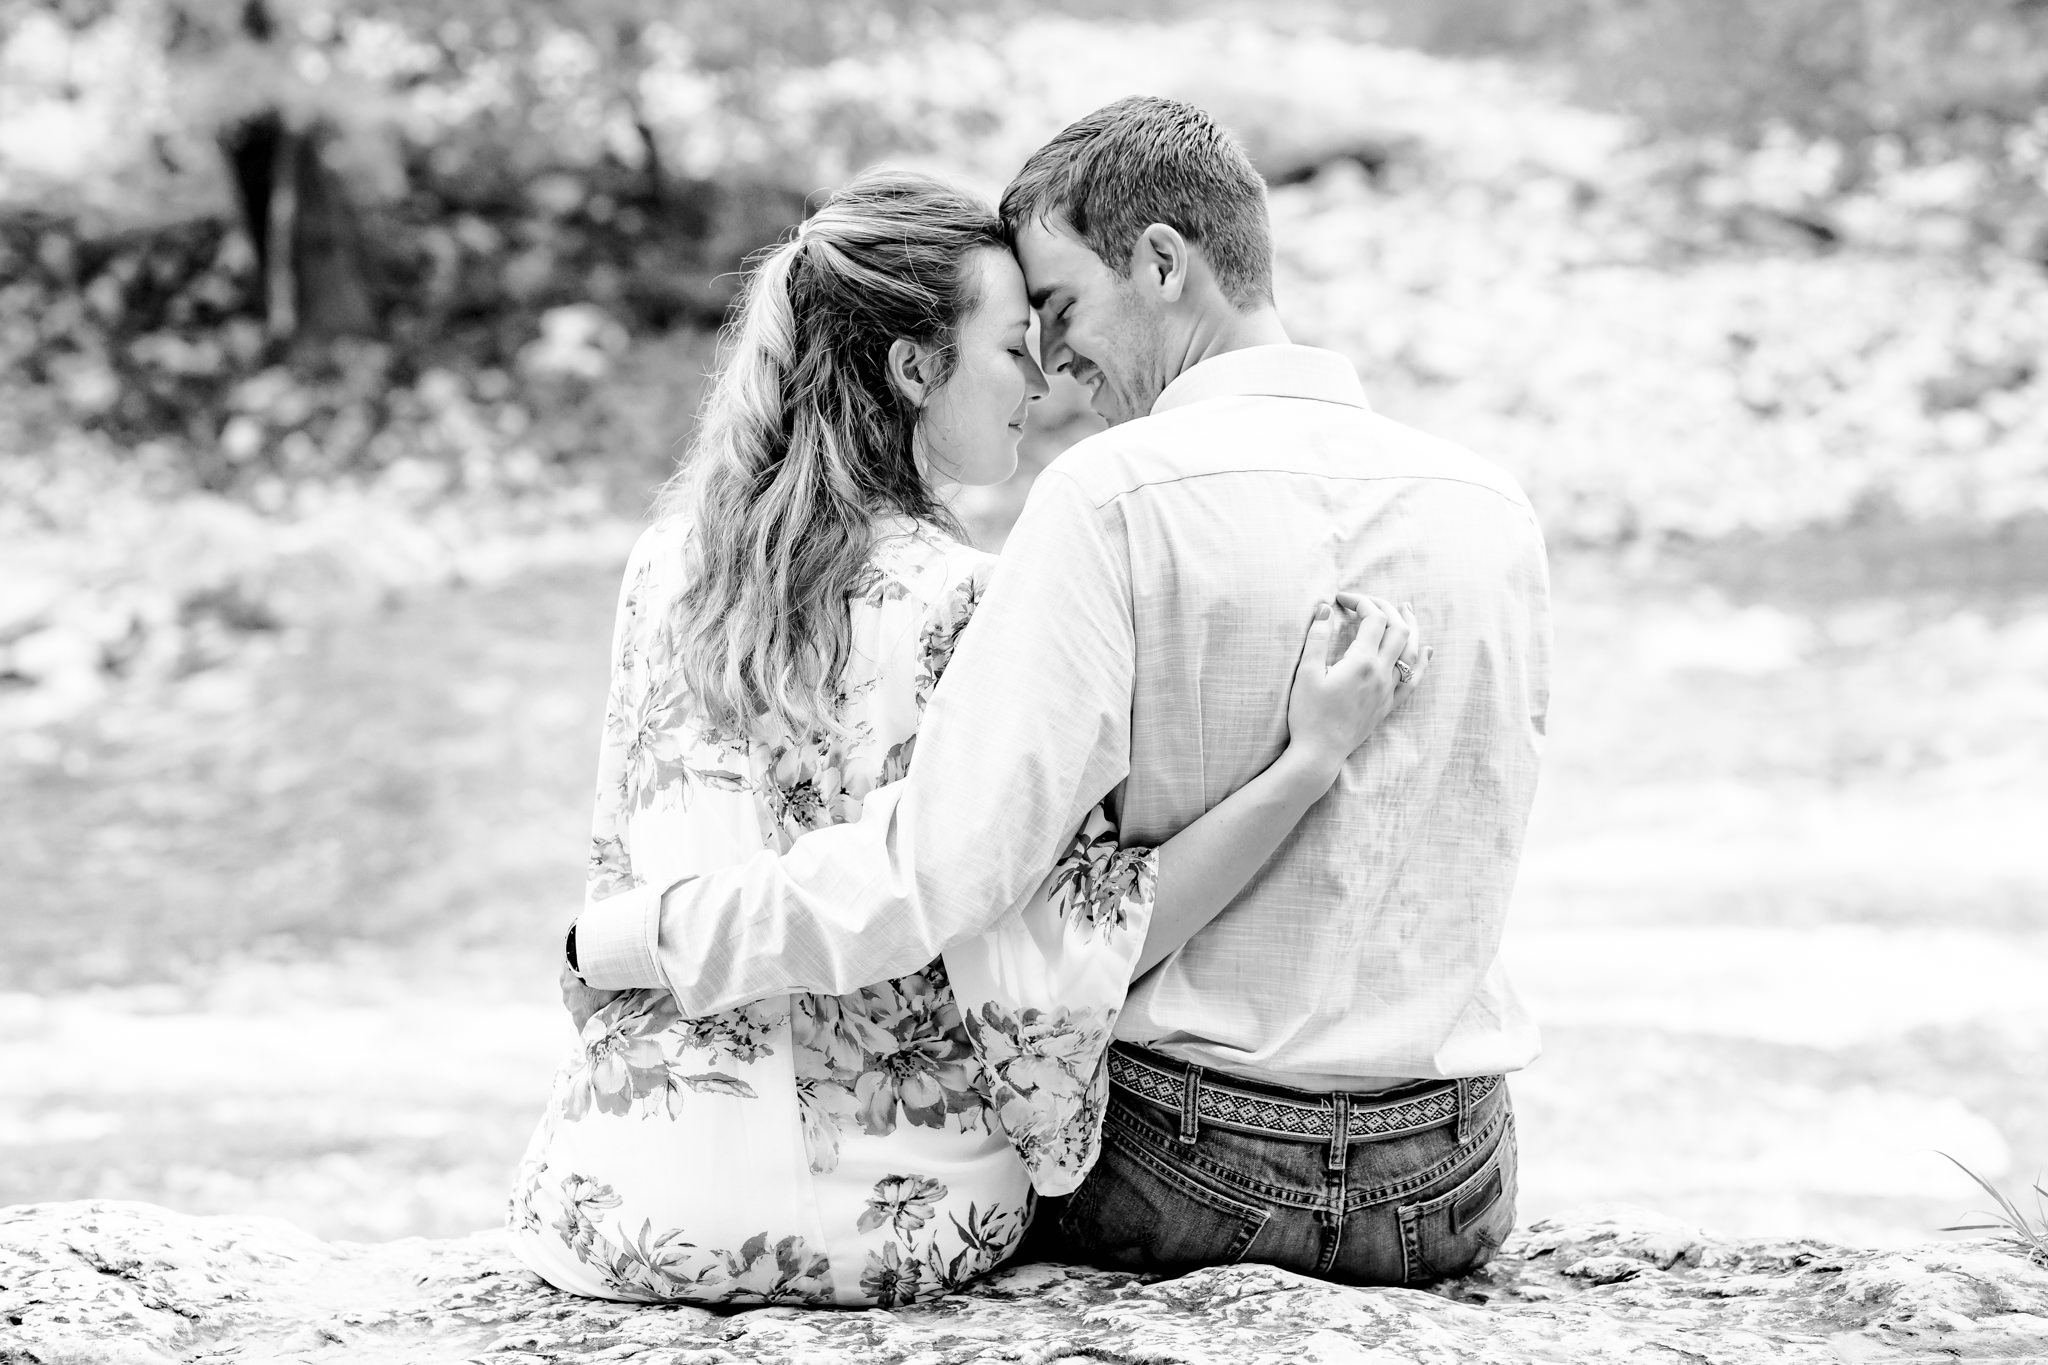 An Engagement Session at Lazy L&L Campground in Canyon Lake, TX by Dawn Elizabeth Studios, New Braunfels Wedding Photographer